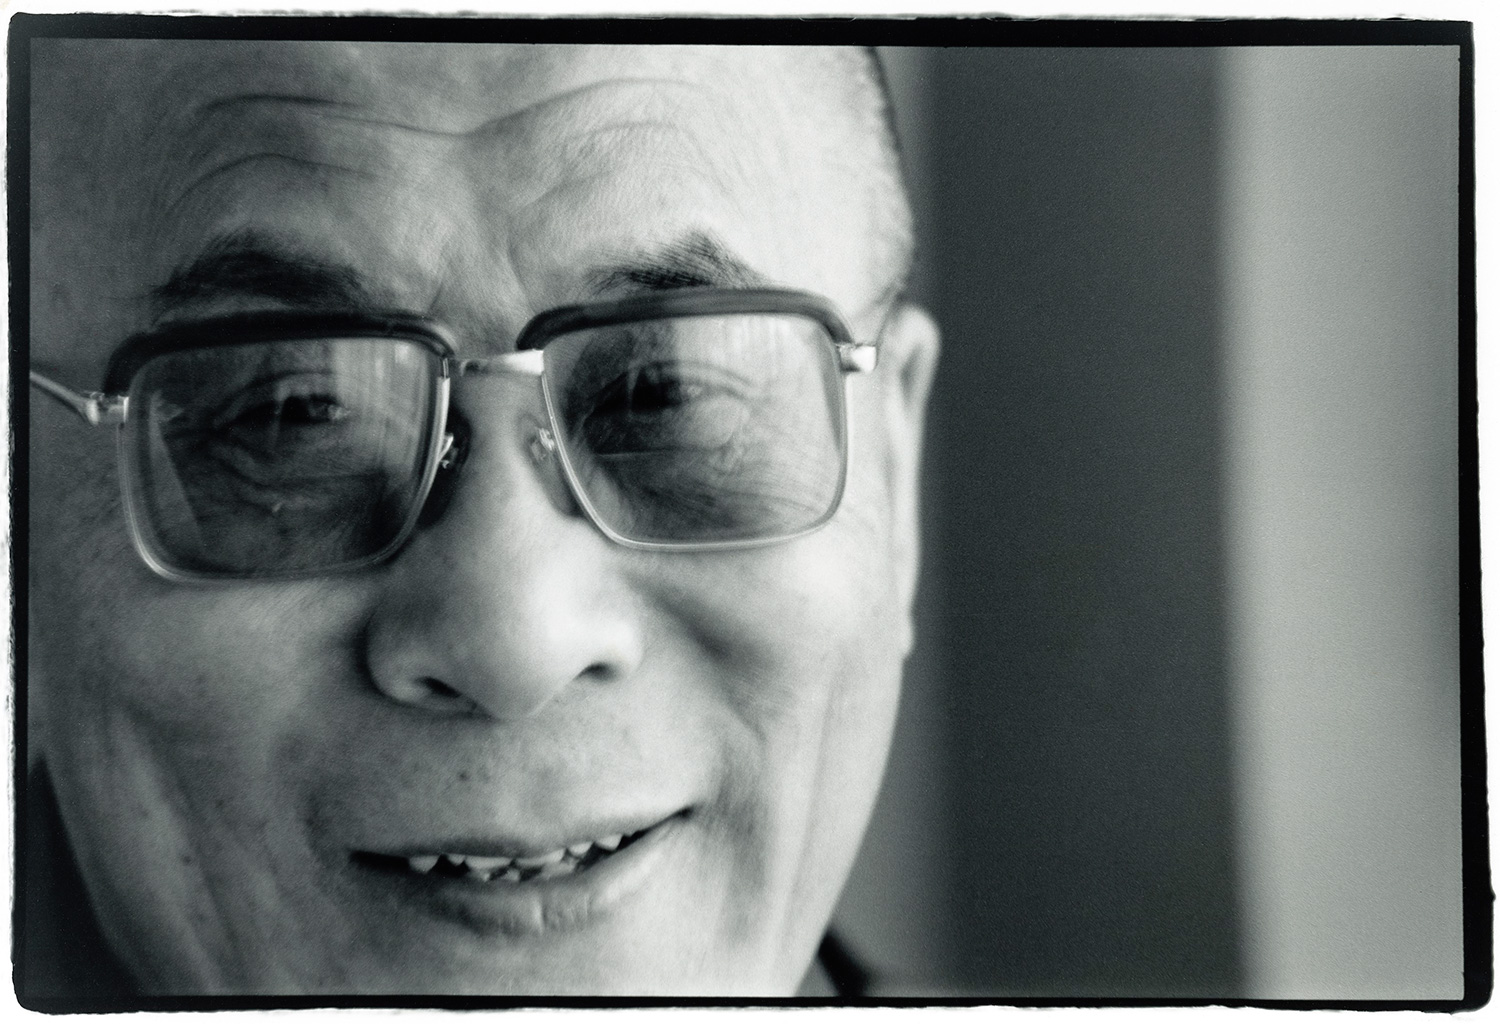  Tenzin Gyatso, 14th Dalai Lama.  Mark Jacobson , fresh from Dharamsala, was doing a followup interview for a profile of, as he called him, ‘The D.L.’ I blagged my way into accompanying him as photographer.&nbsp; This was shot in the DL’s hotel suite